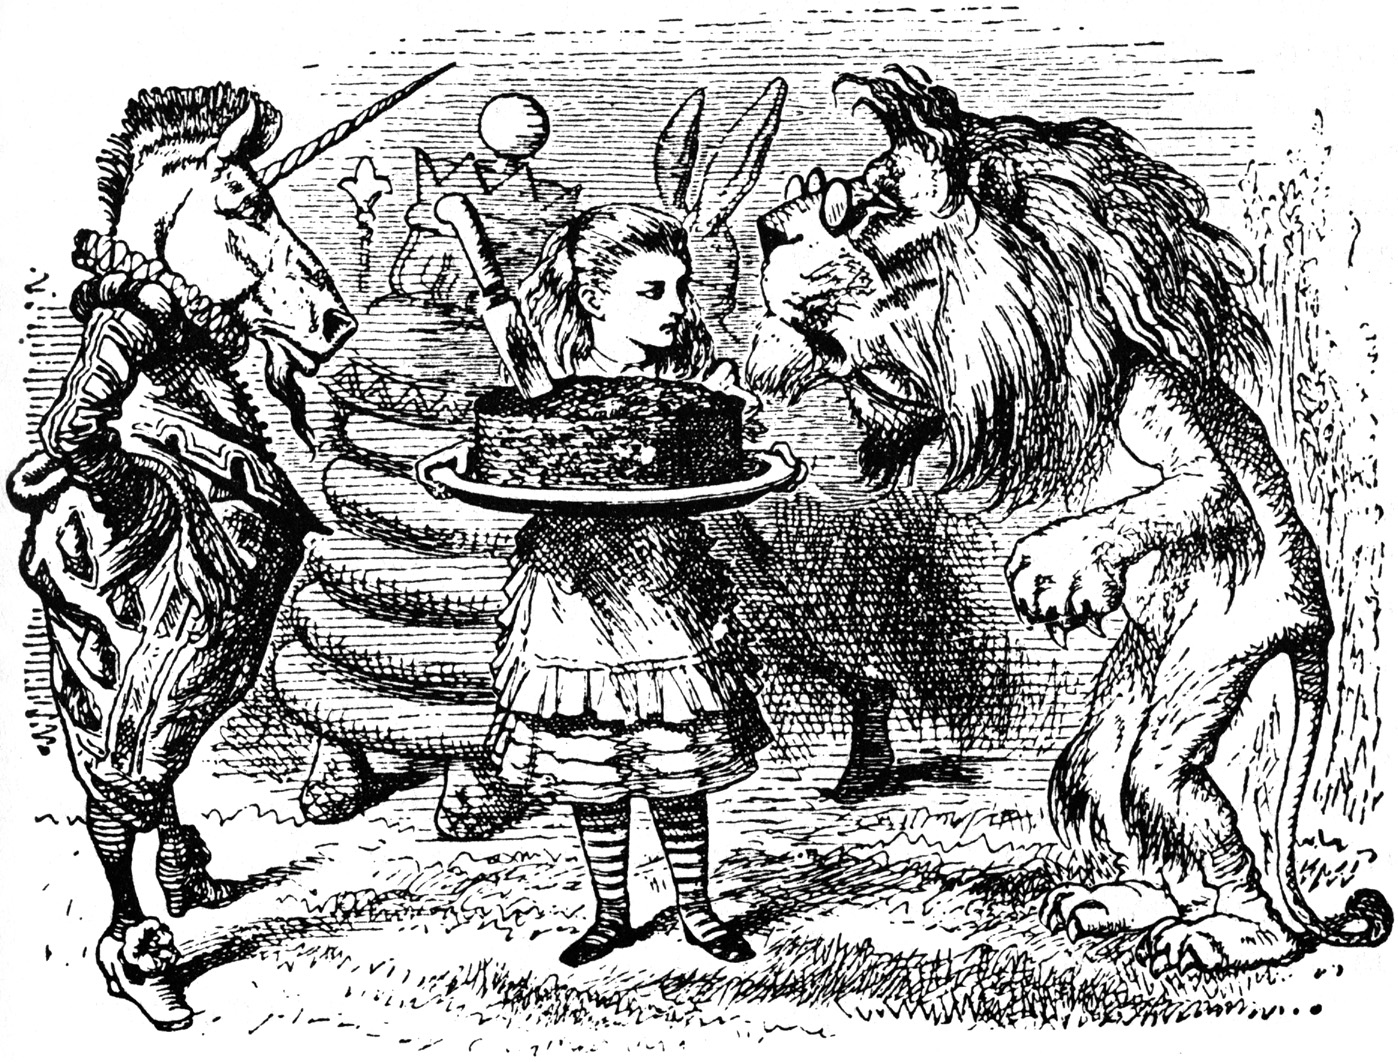 Hero image for The Looking Glass: New Perspectives on Children's Books featuring one of the original pencil illustrations for Alice's Adventures in Wonderland depicting Alice serving food to an old lion and a unicorn with other characters in the background.